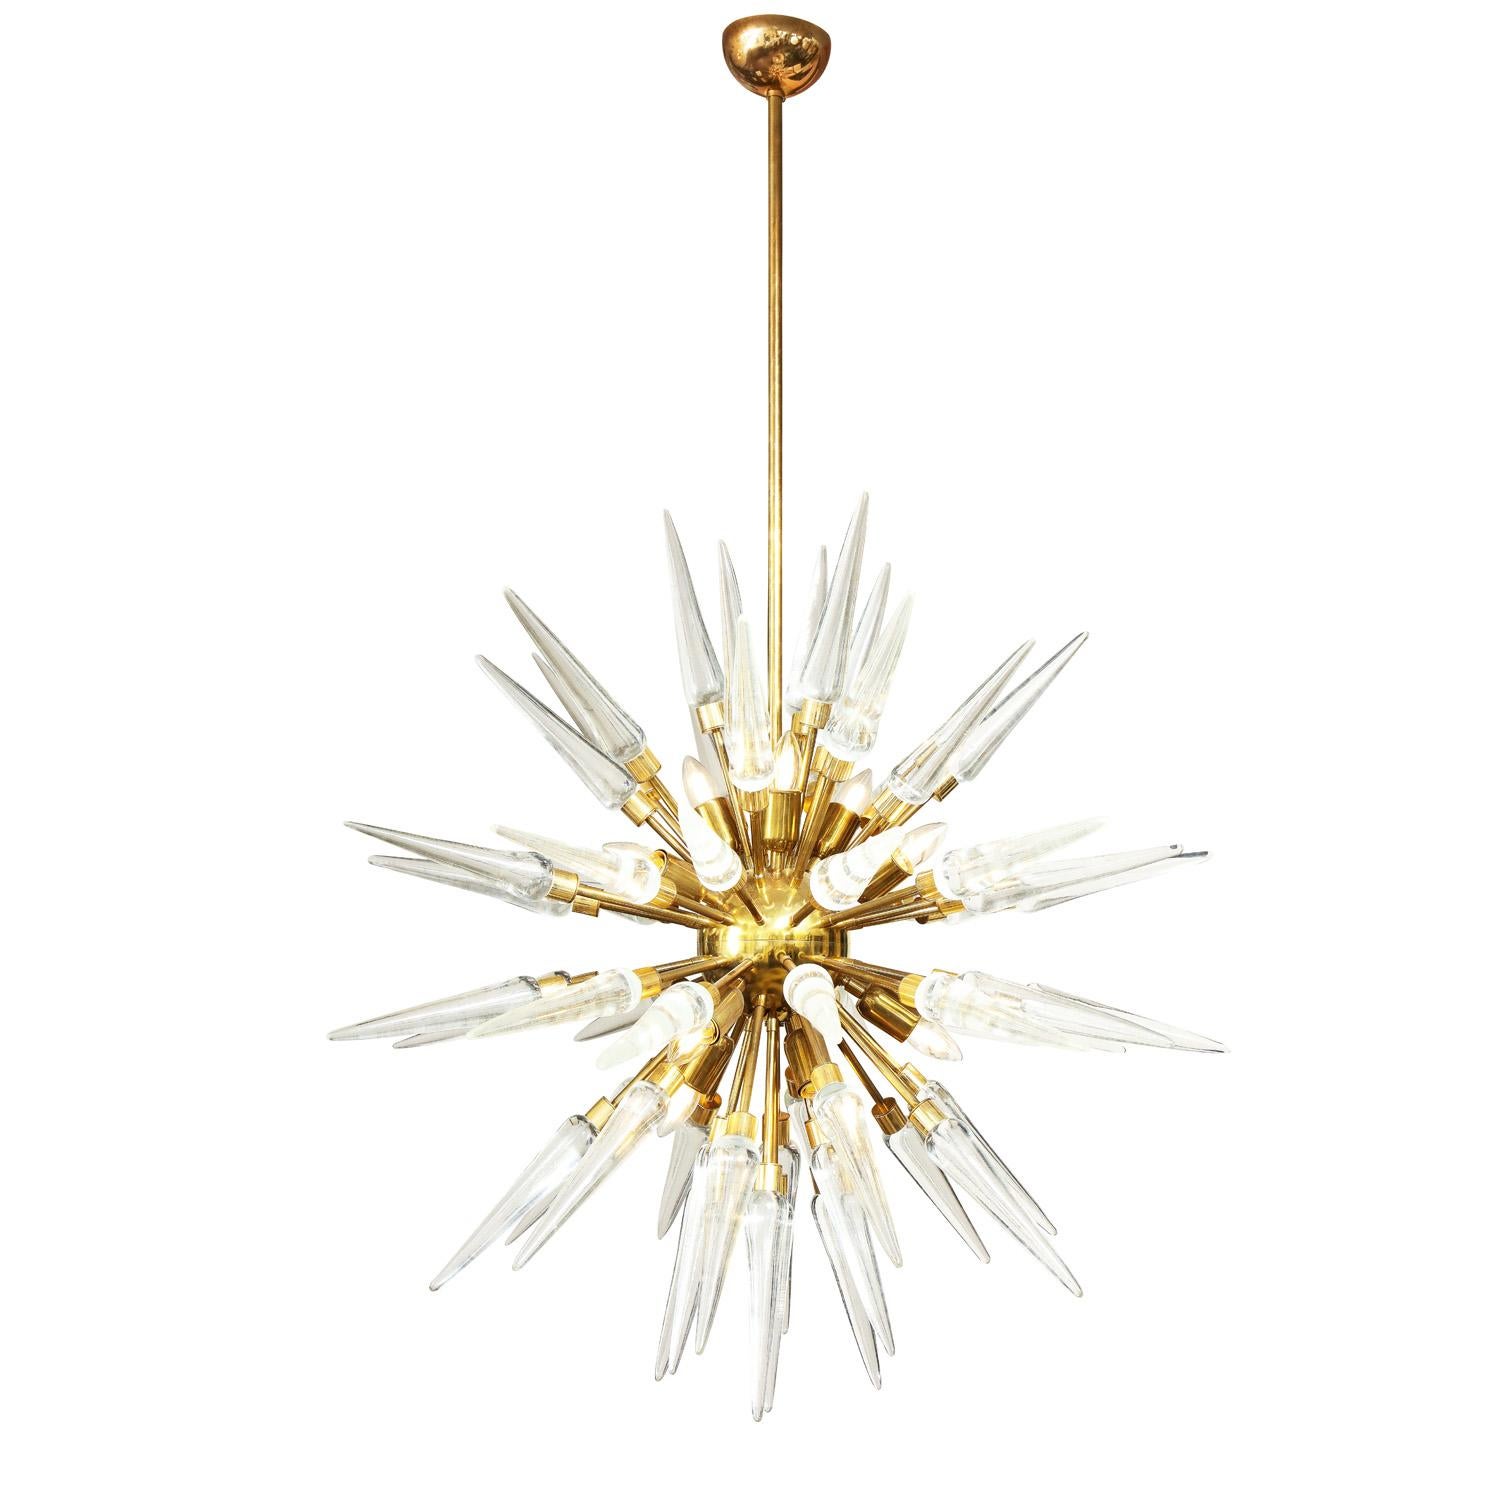 Custom Sputnik-style chandelier in polished brass with clear Murano Glass spikes. Italy 2022. This piece is currently available as shown in our NYC showroom. For custom sizes and finishes please inquire with Venfield.
